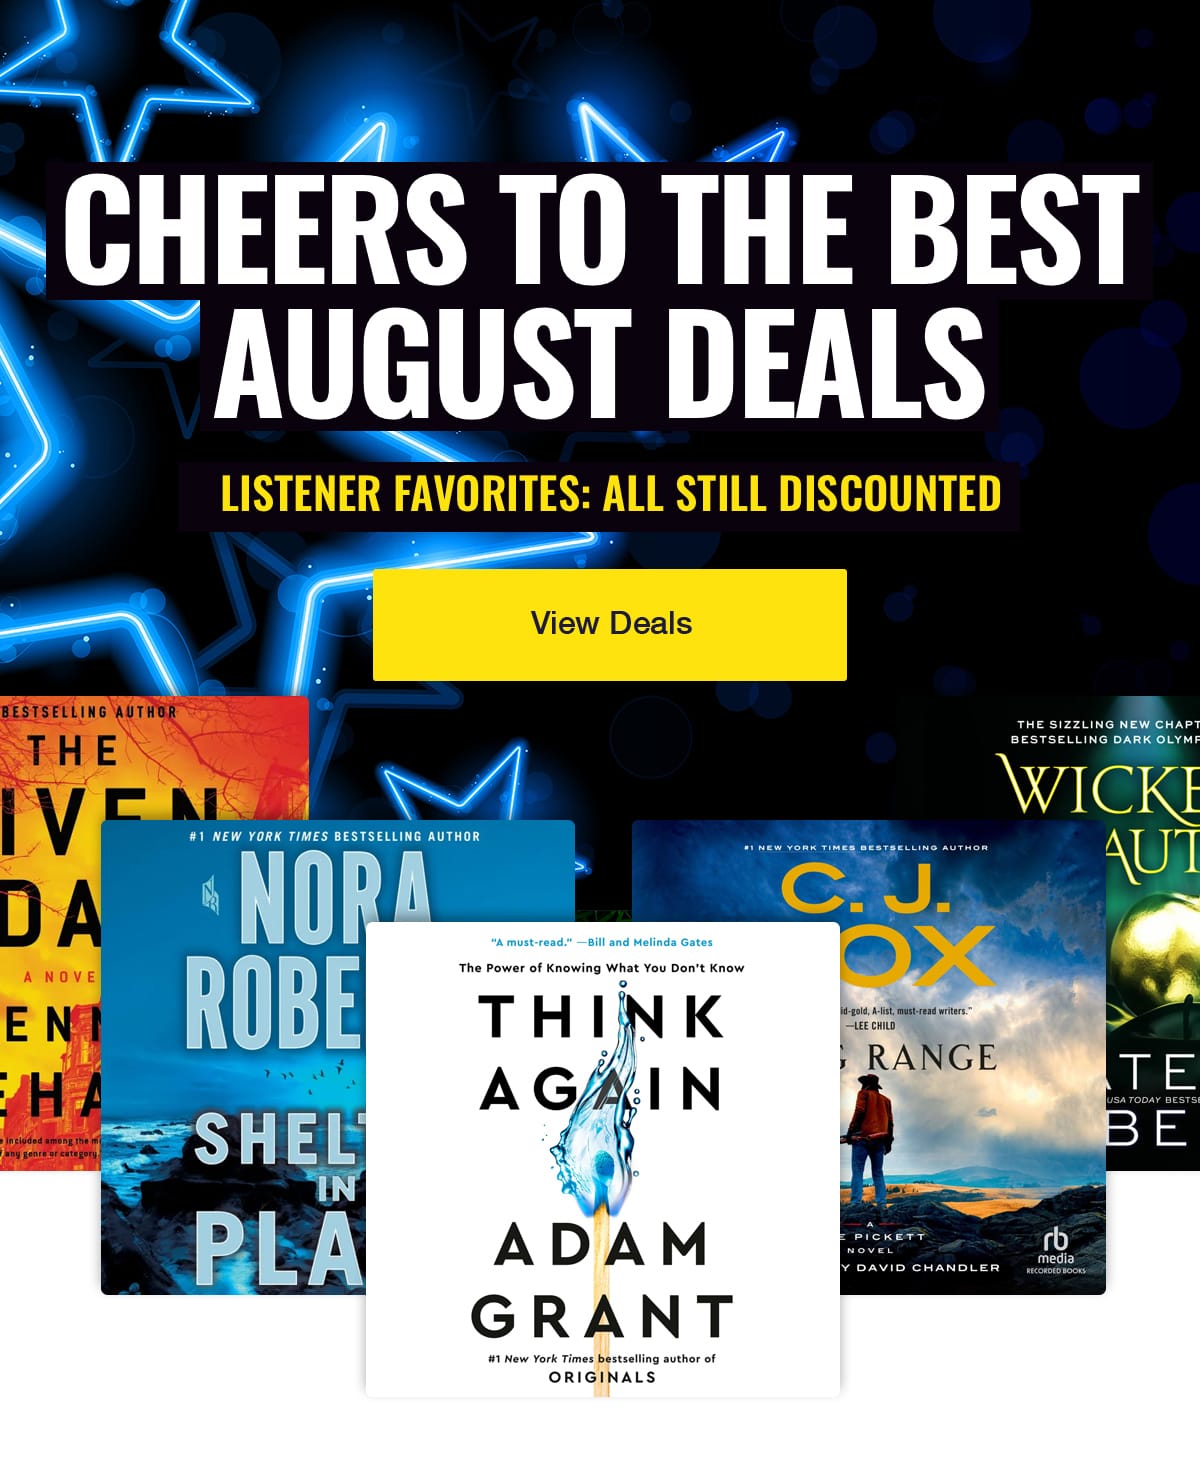 Cheers to the Best August Deals